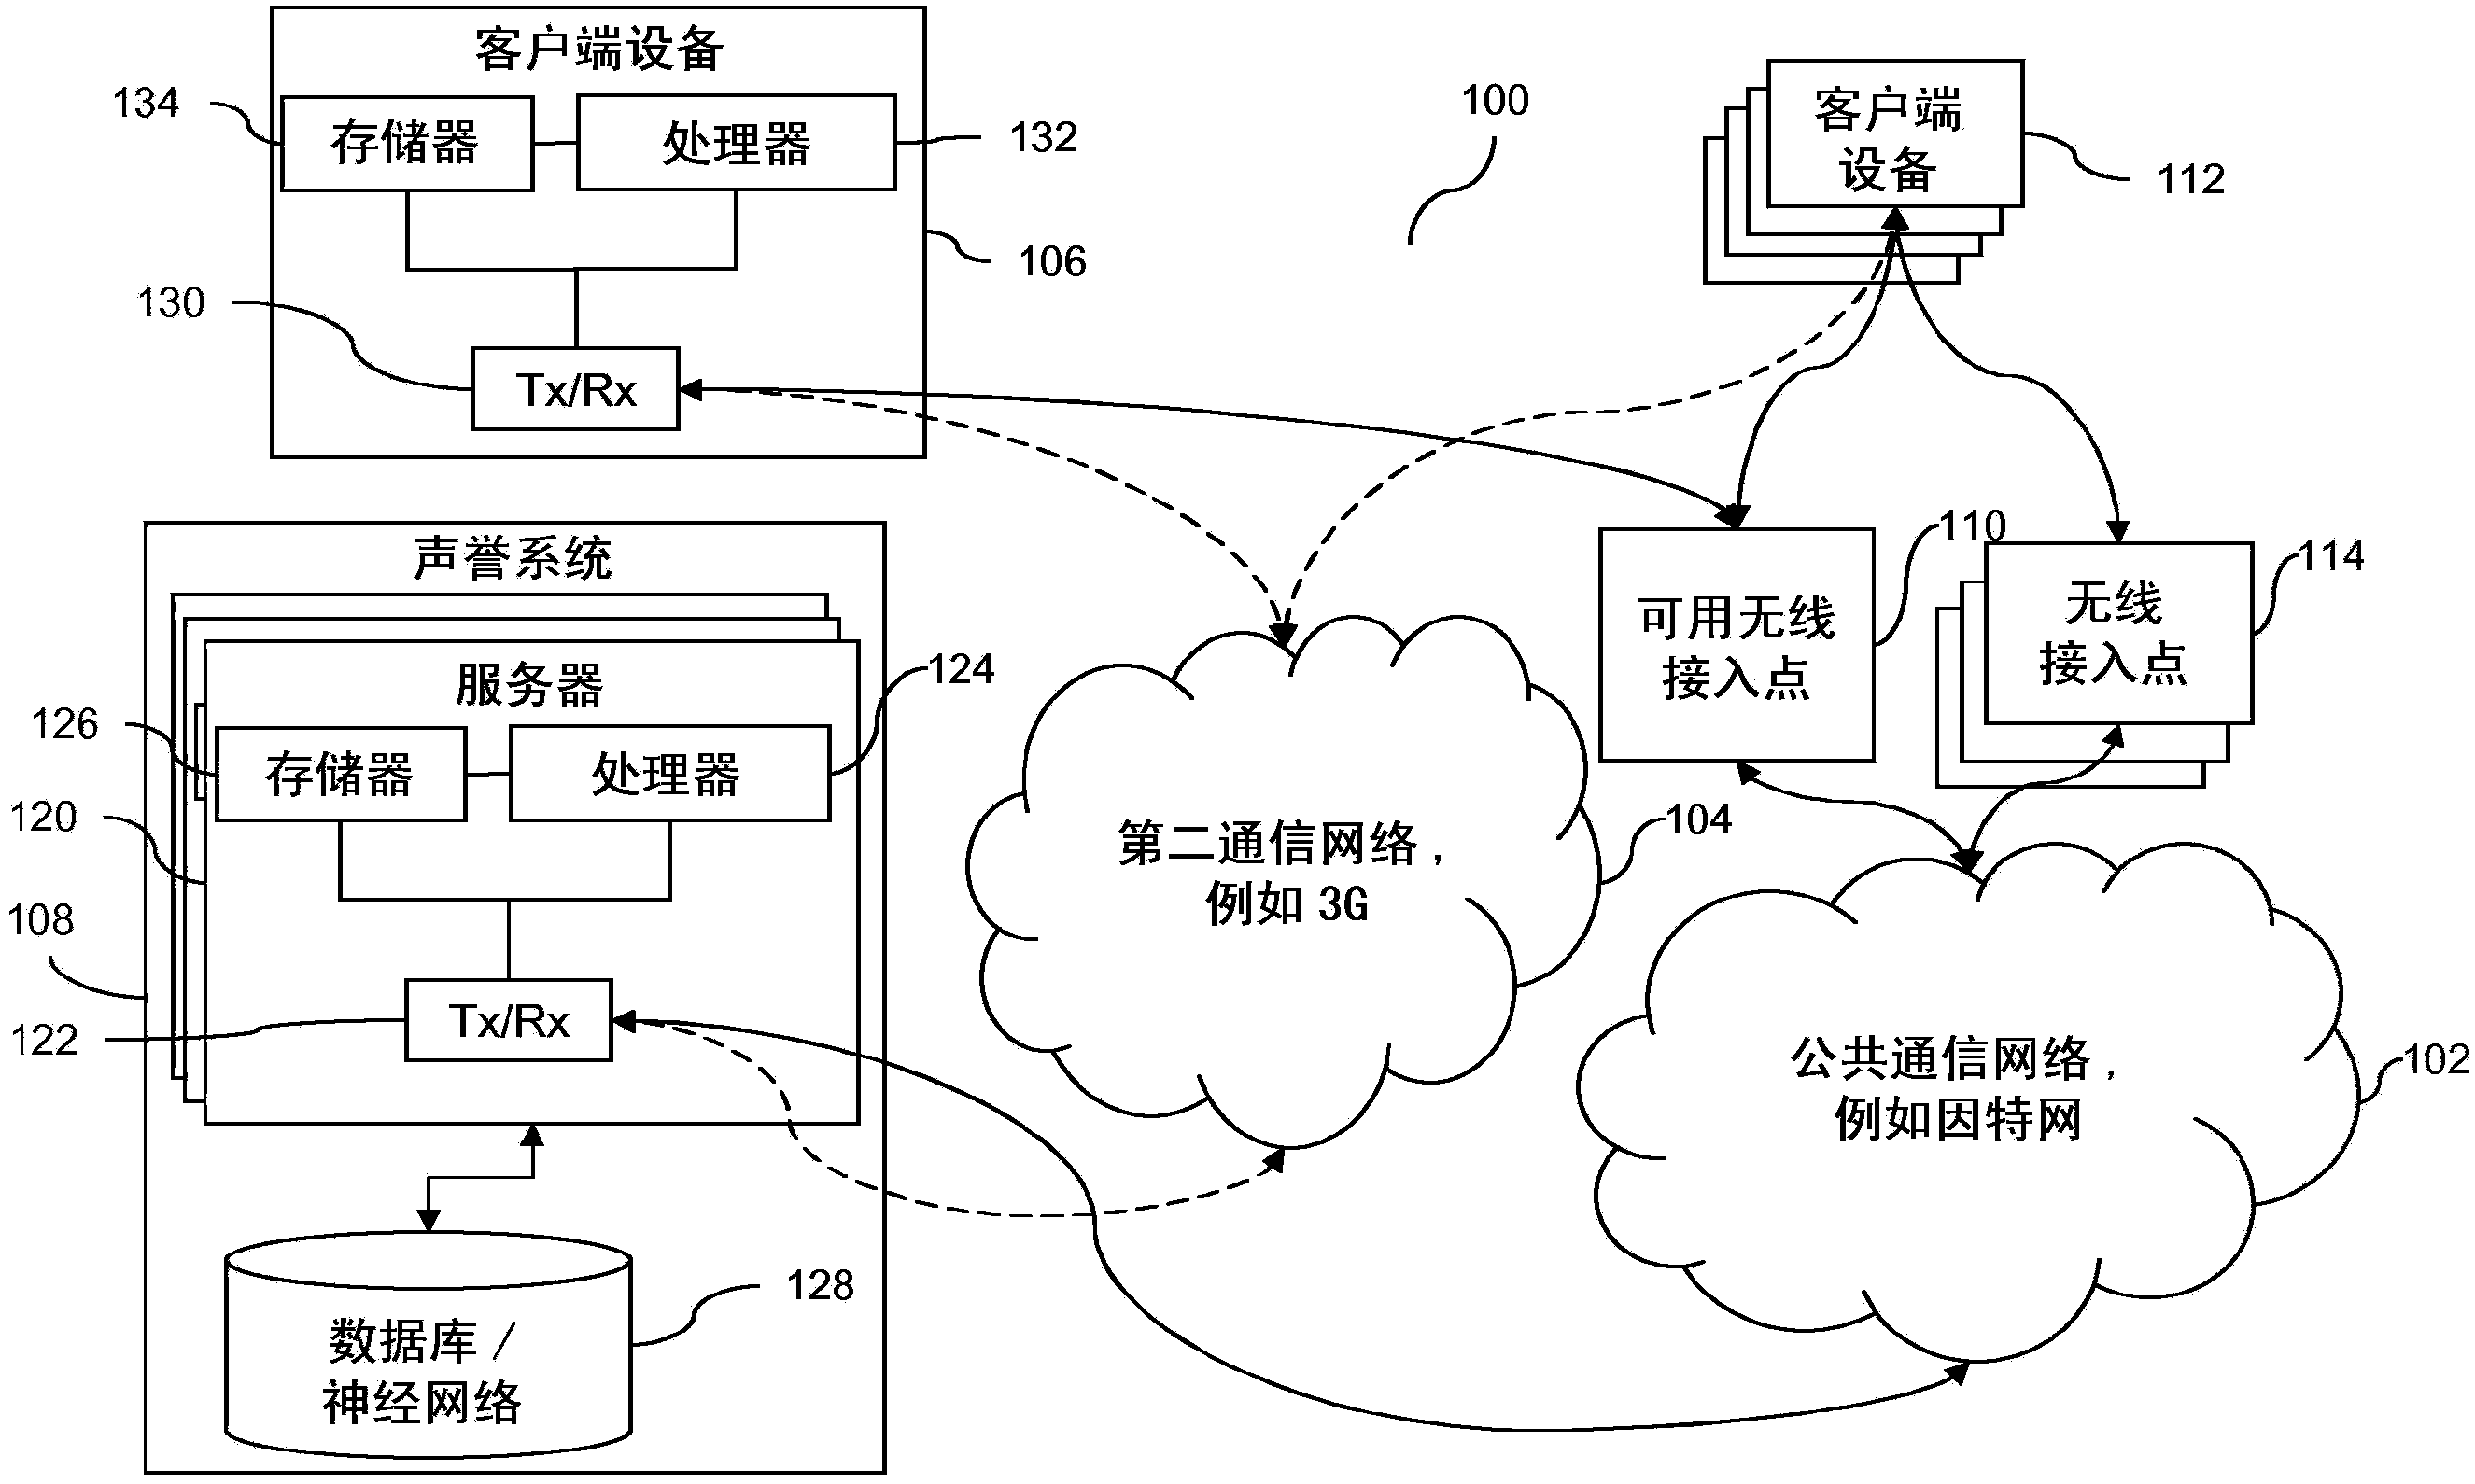 Detection of suspect wireless access points